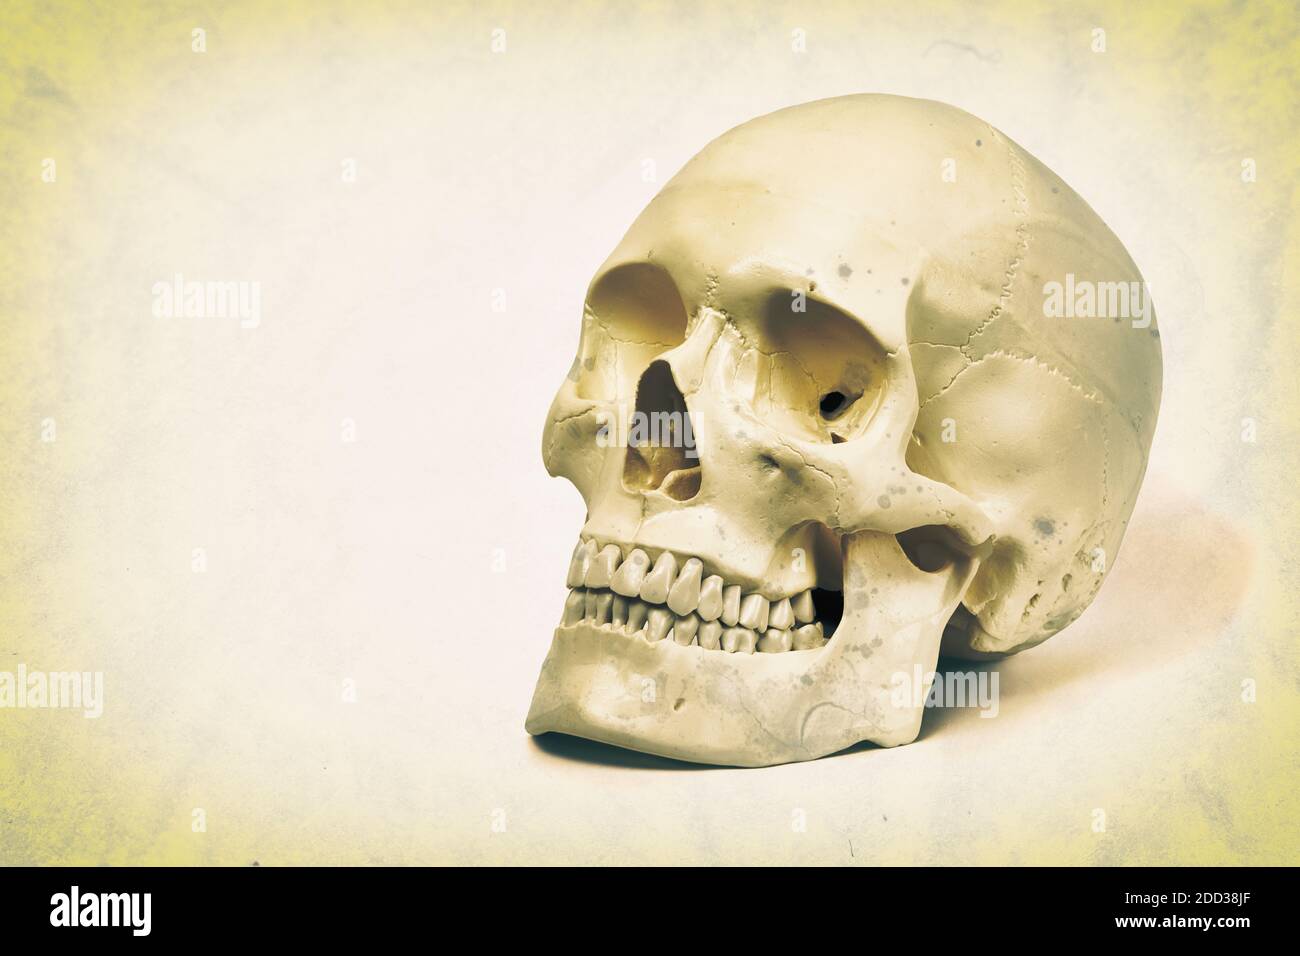 Realistic looking human skull with dirt and fungus, grunge processing, copy space Stock Photo